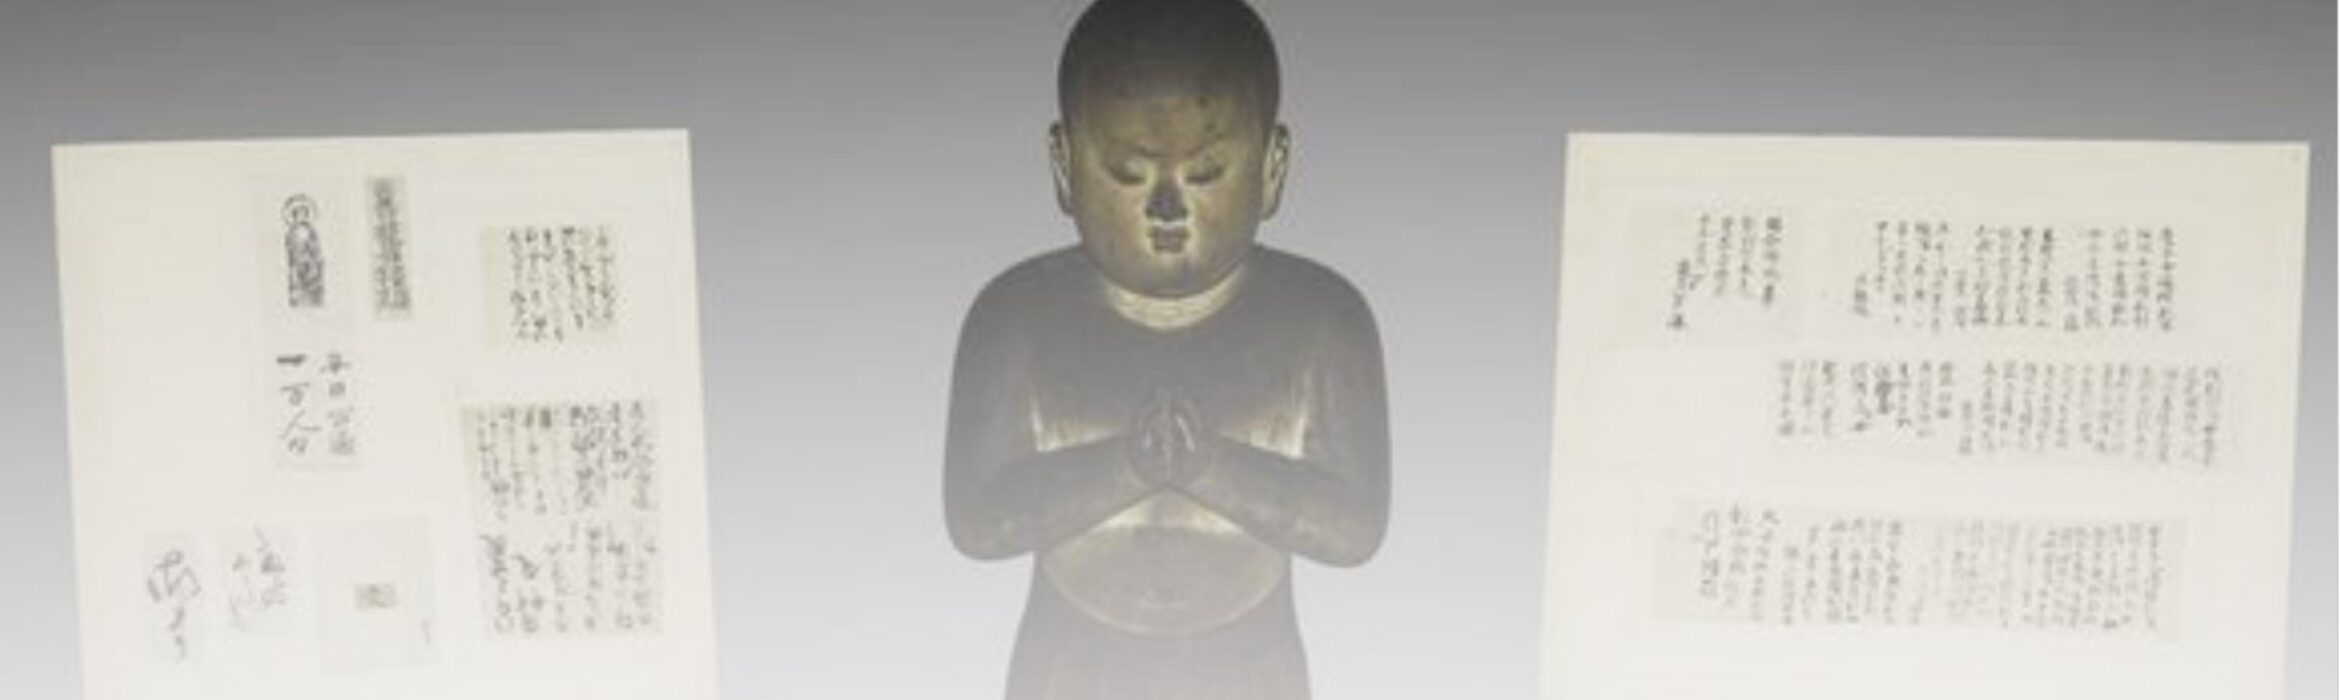 New Horizons In Research on the Contents Inside of East Asian Statues